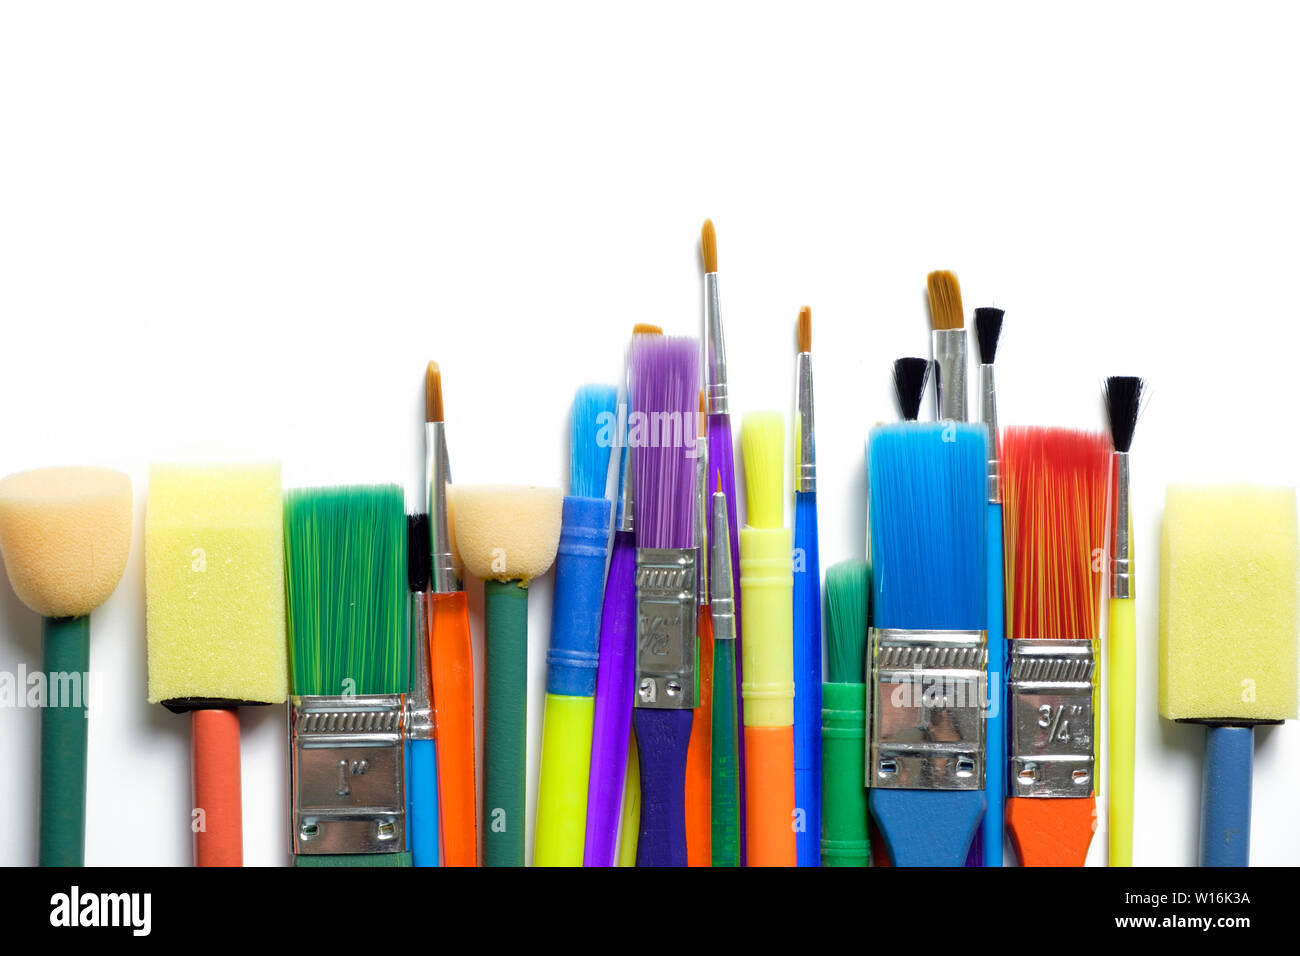 Row of artist paint brushes on white background Stock Photo